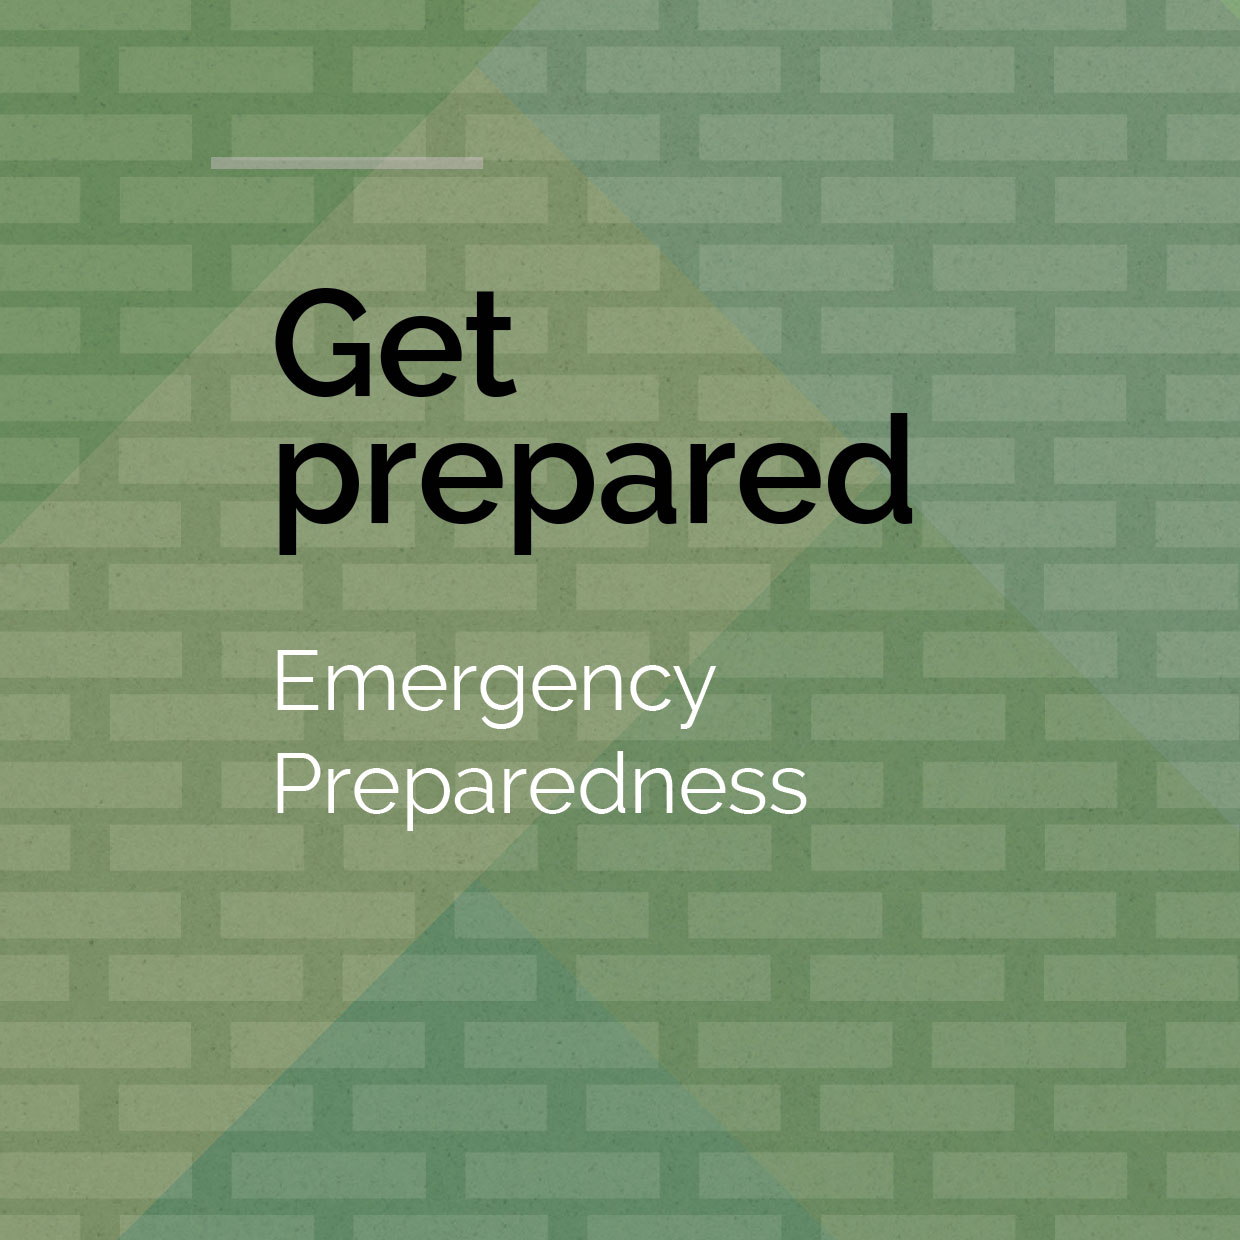 Get Prepared - The Wall